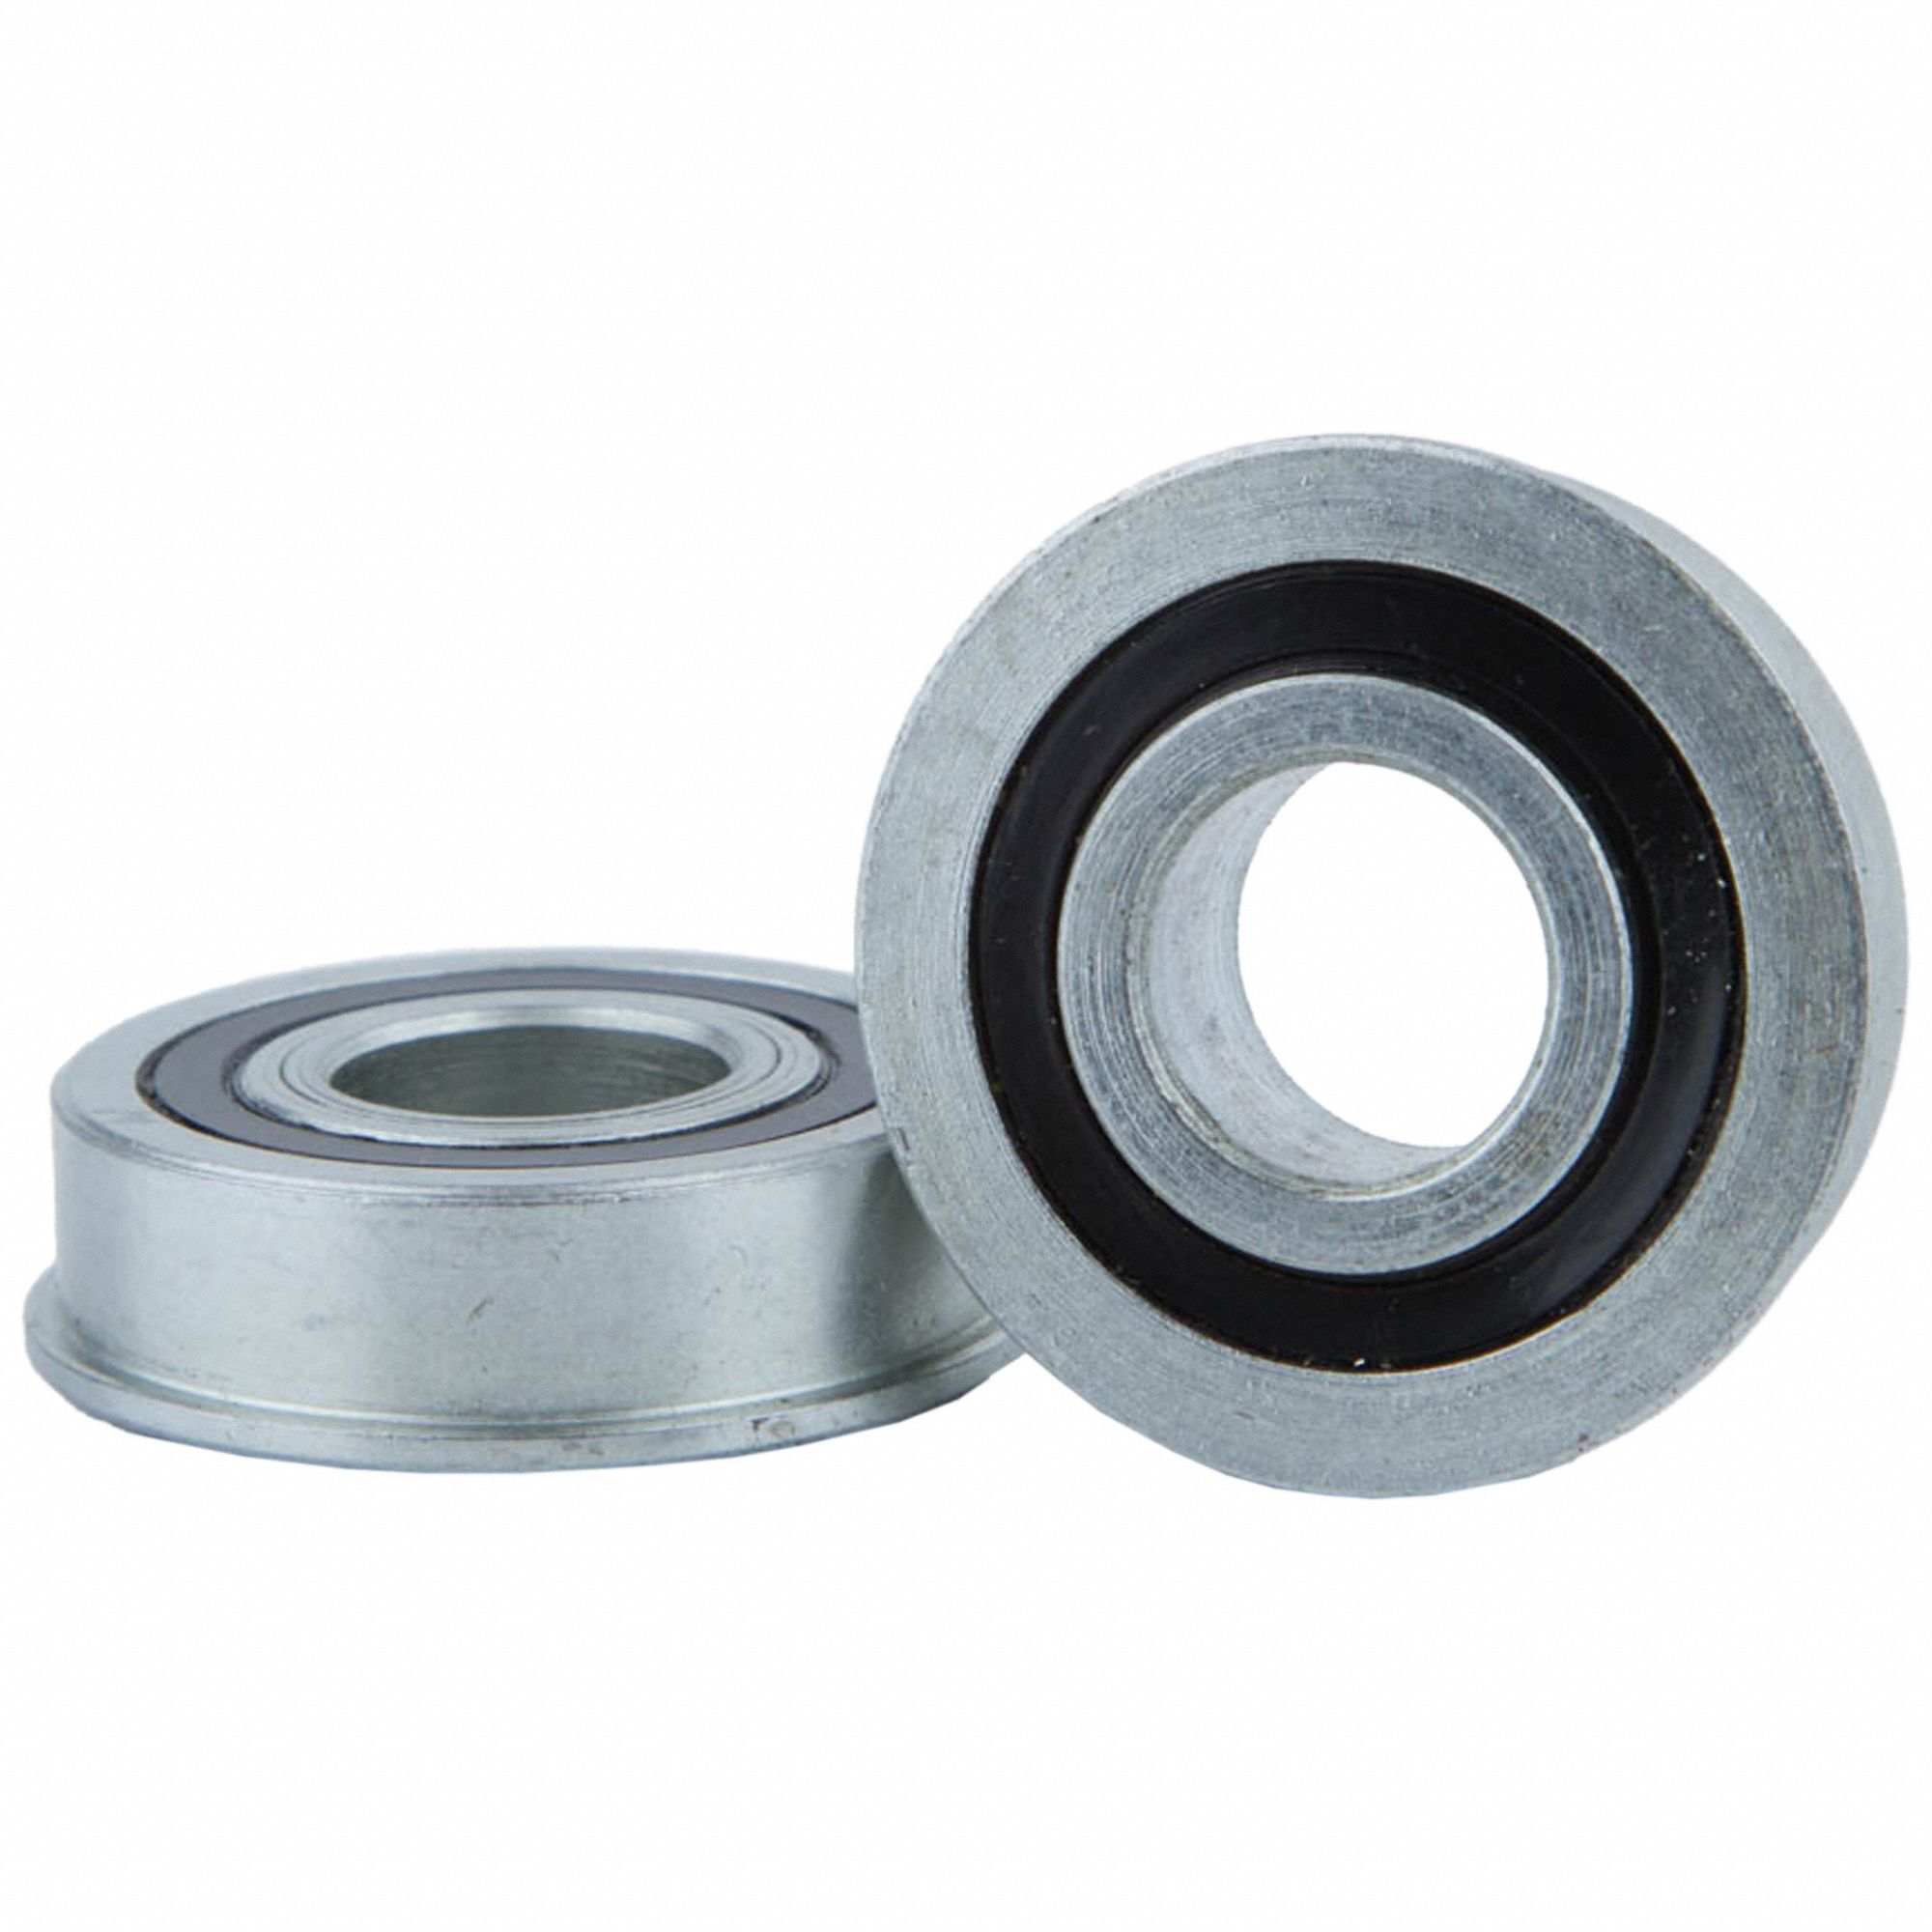 Unground Radial Ball Bearing: UGF1.0X2.0-2RS, 1 in Bore, 2.187 in Flange Dia, 2 in OD